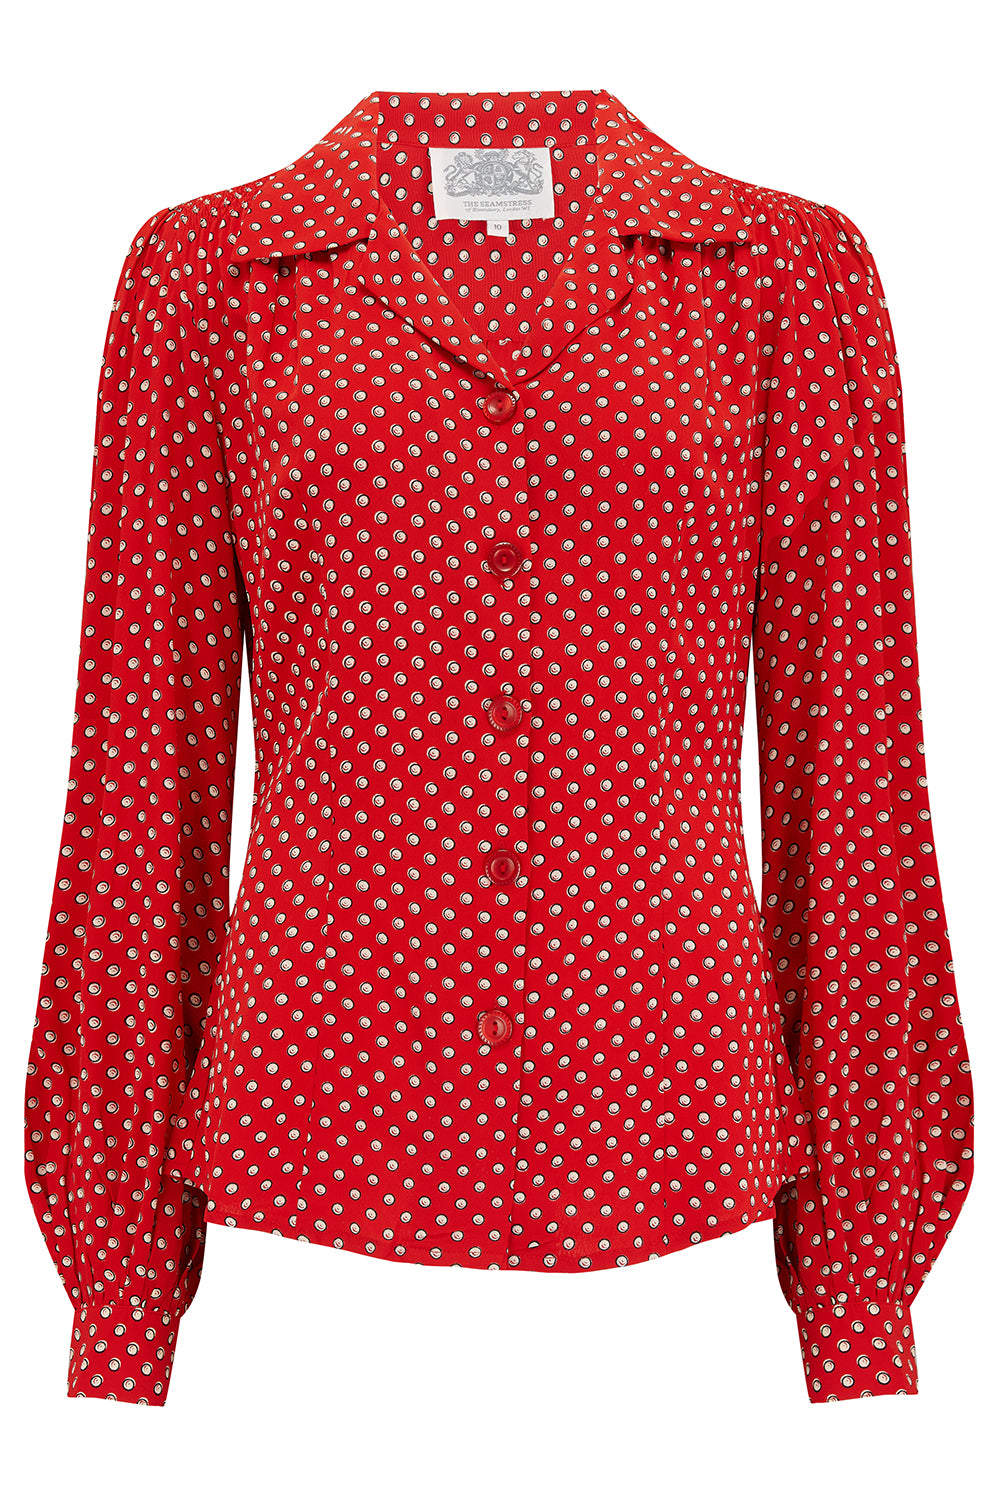 Poppy Long Sleeve Blouse in Red Ditzy Dot , Authentic & Classic 1940s Vintage Style - True and authentic vintage style clothing, inspired by the Classic styles of CC41 , WW2 and the fun 1950s RocknRoll era, for everyday wear plus events like Goodwood Revival, Twinwood Festival and Viva Las Vegas Rockabilly Weekend Rock n Romance The Seamstress Of Bloomsbury